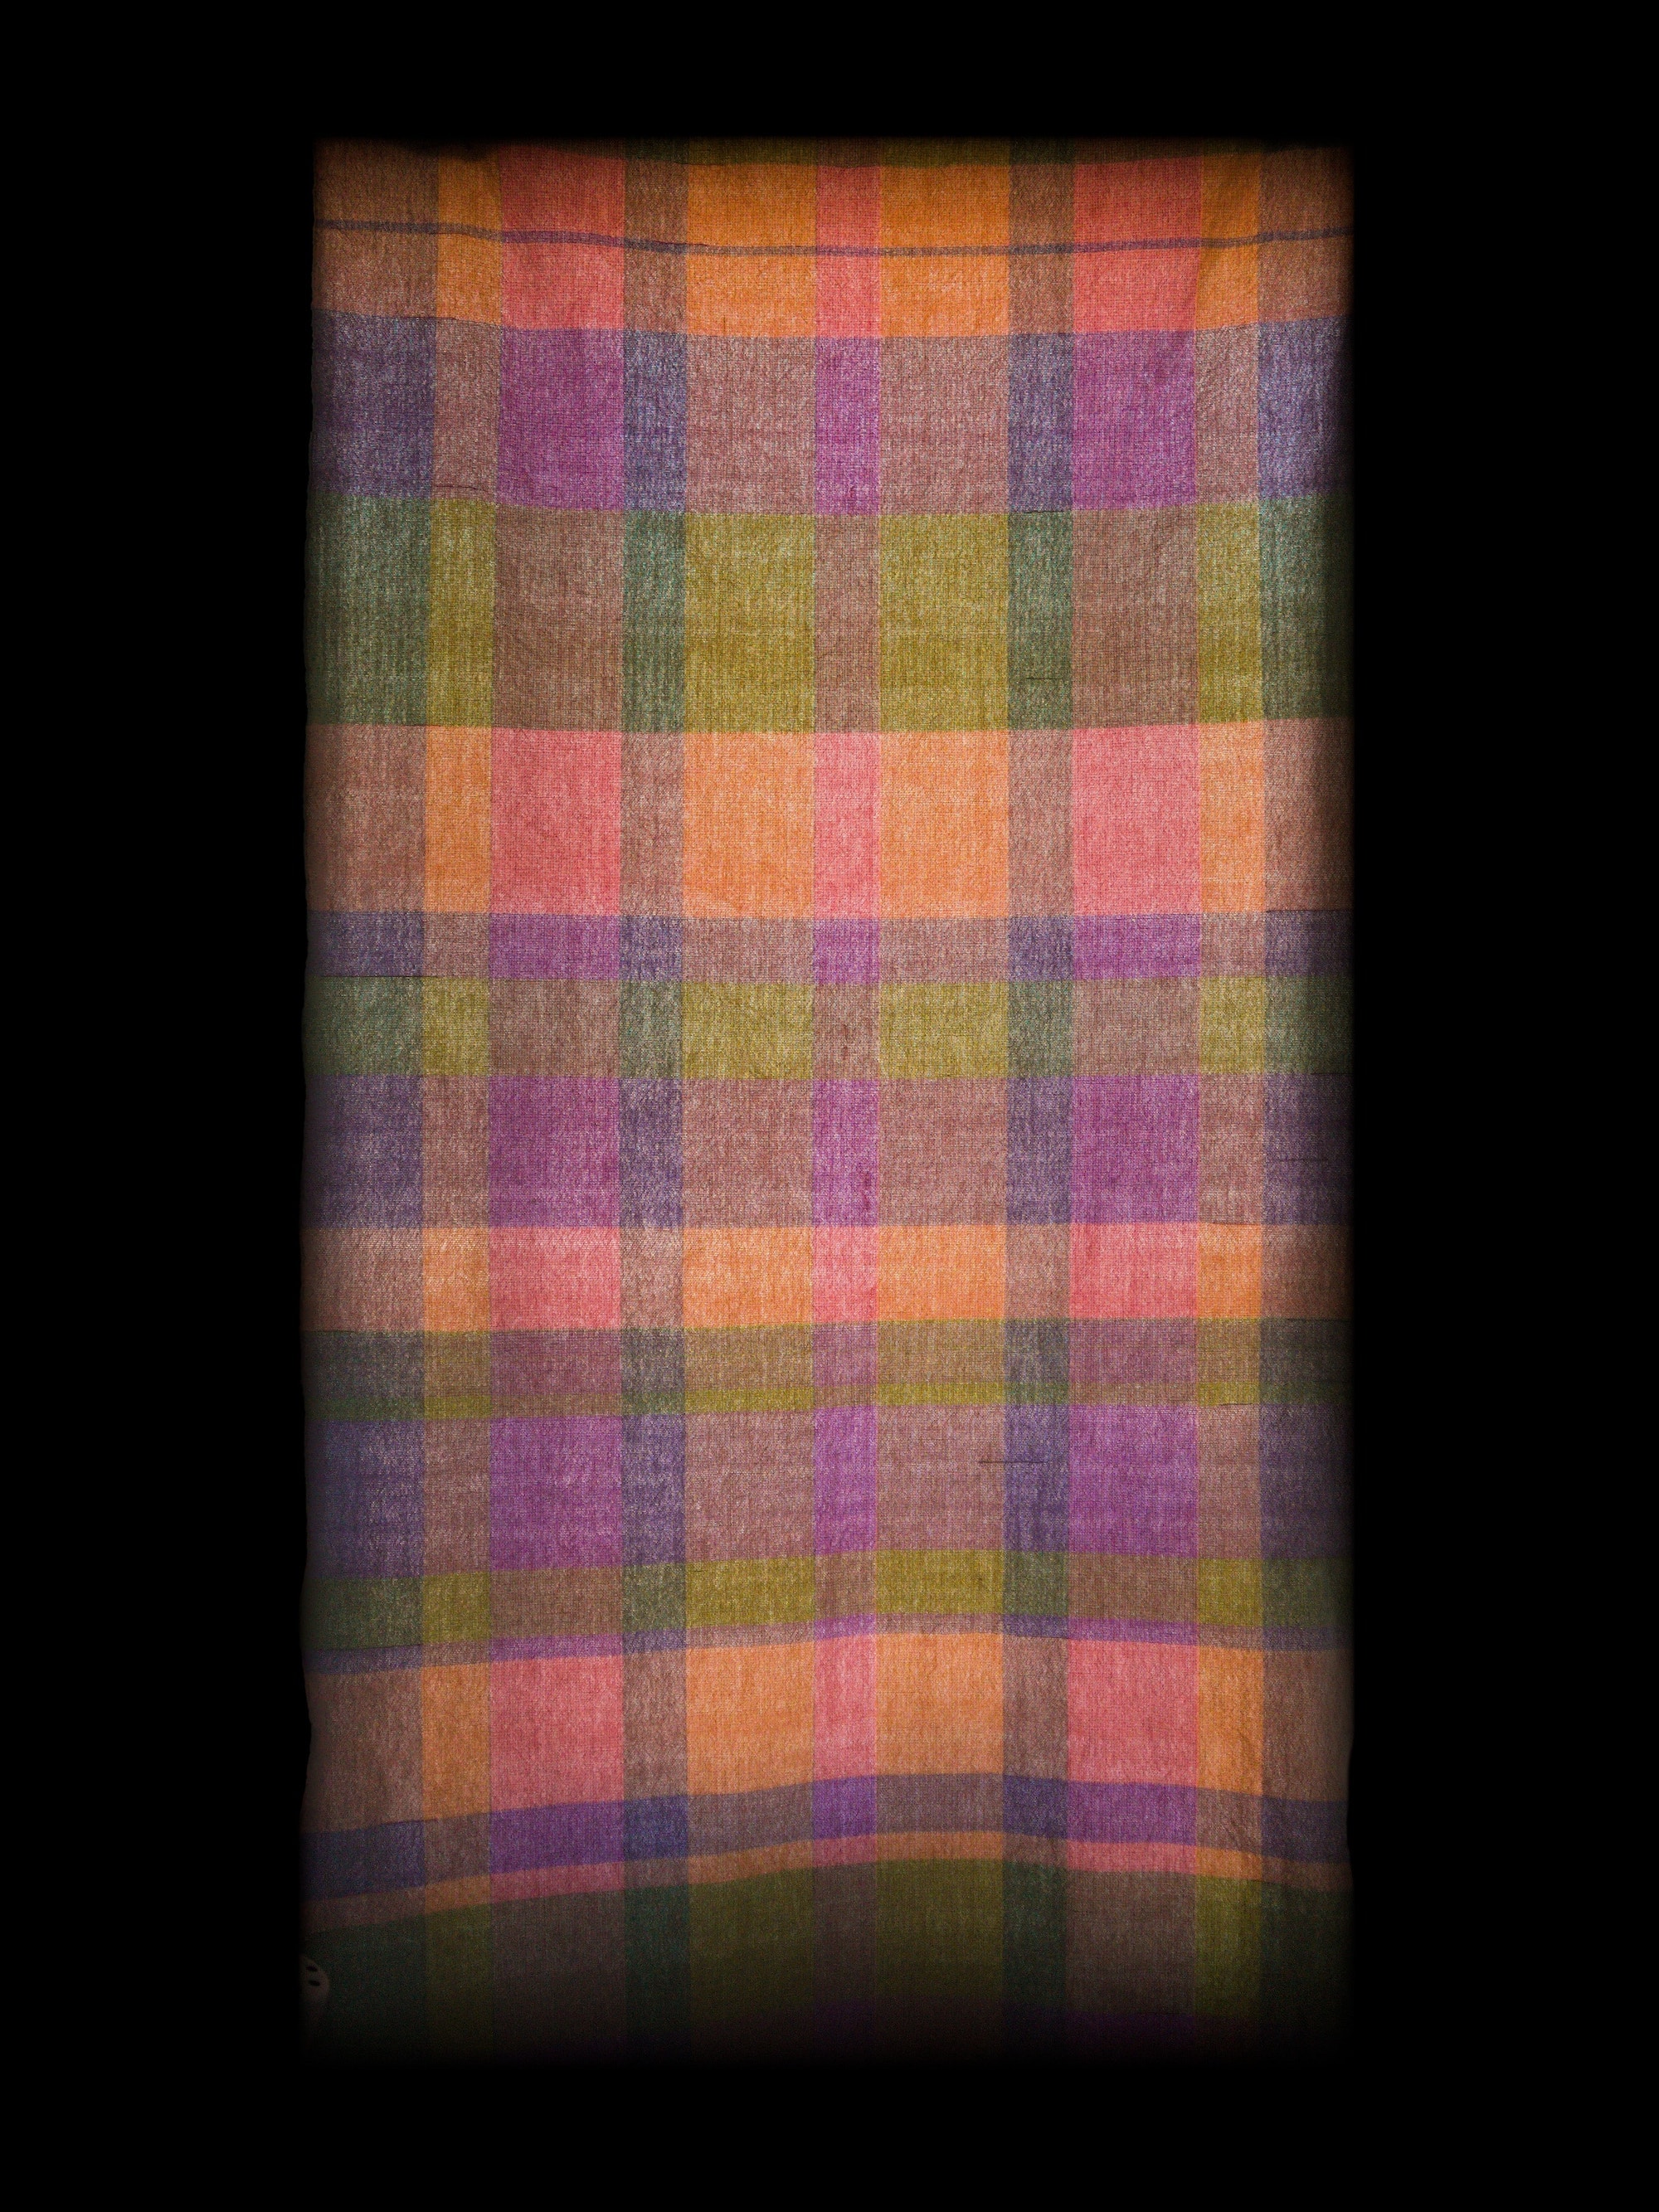 a backlit rectangle of cloth, with long interlocking stripes in earthy green, orange, purple, and pink. it's abstract, but its glow feels heightened or reverential. the edges fade into a black background.